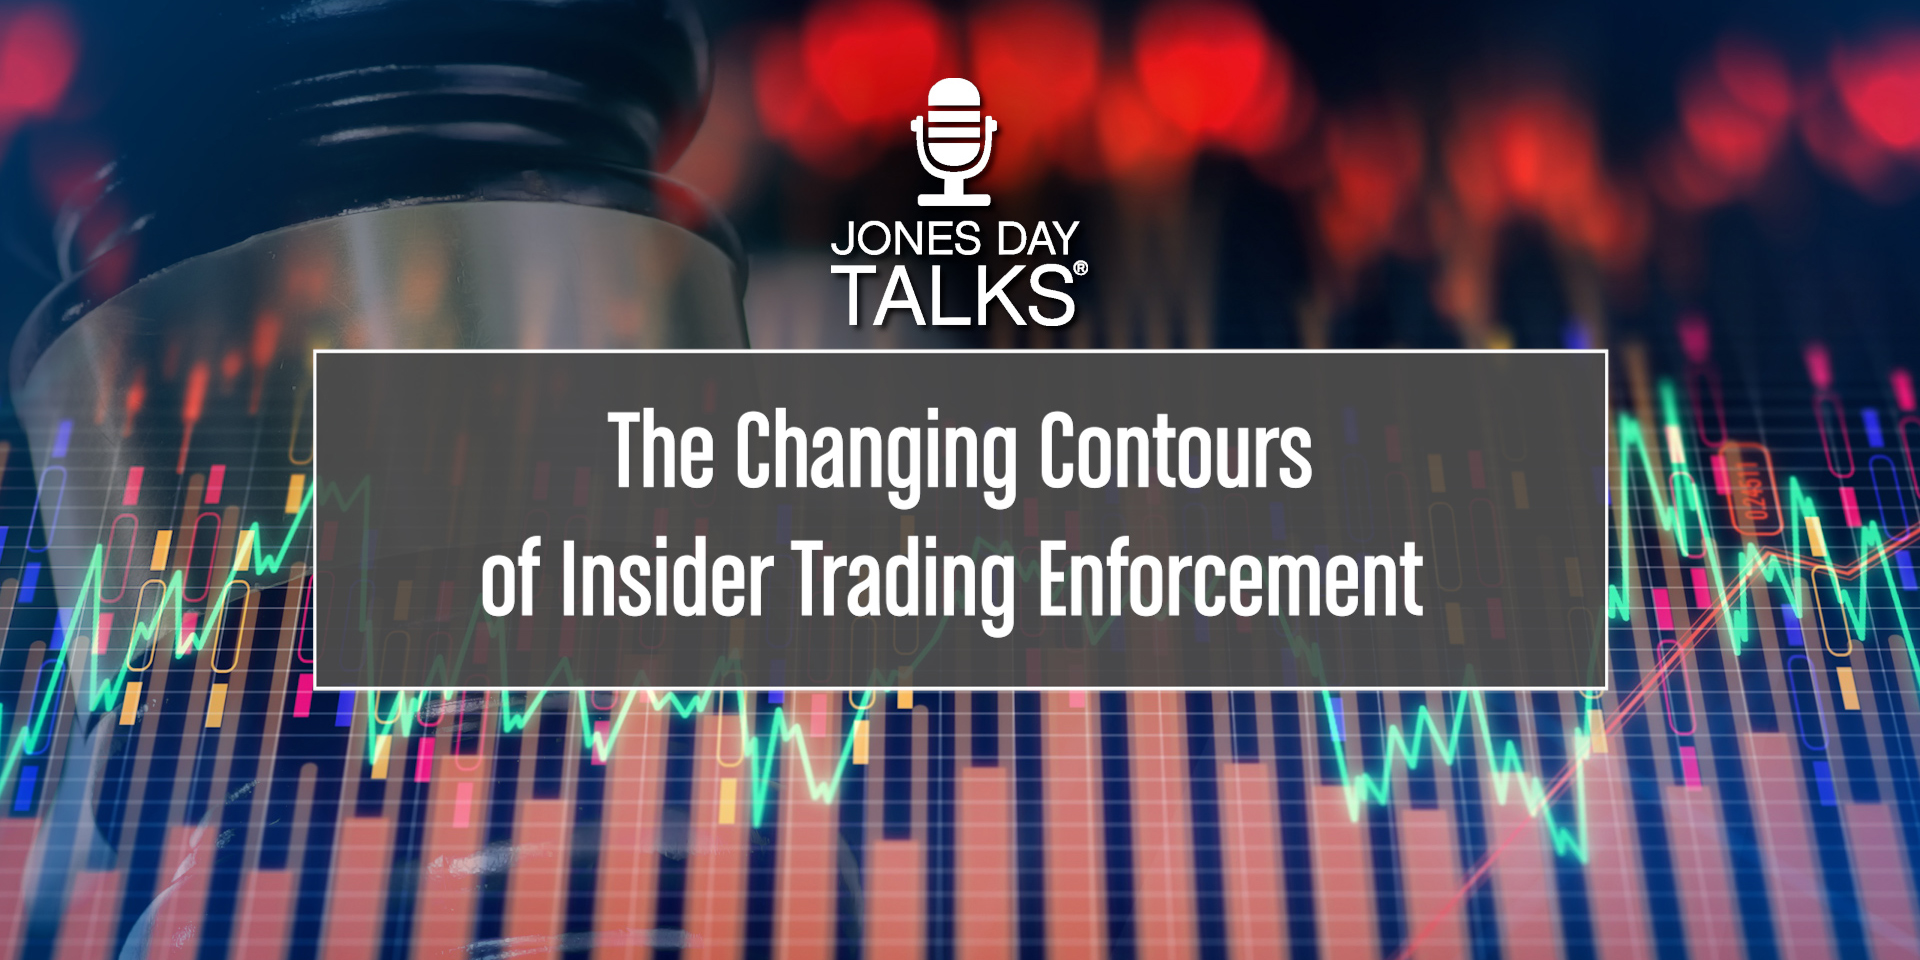 JONES DAY TALKS The Changing Contours of Insider